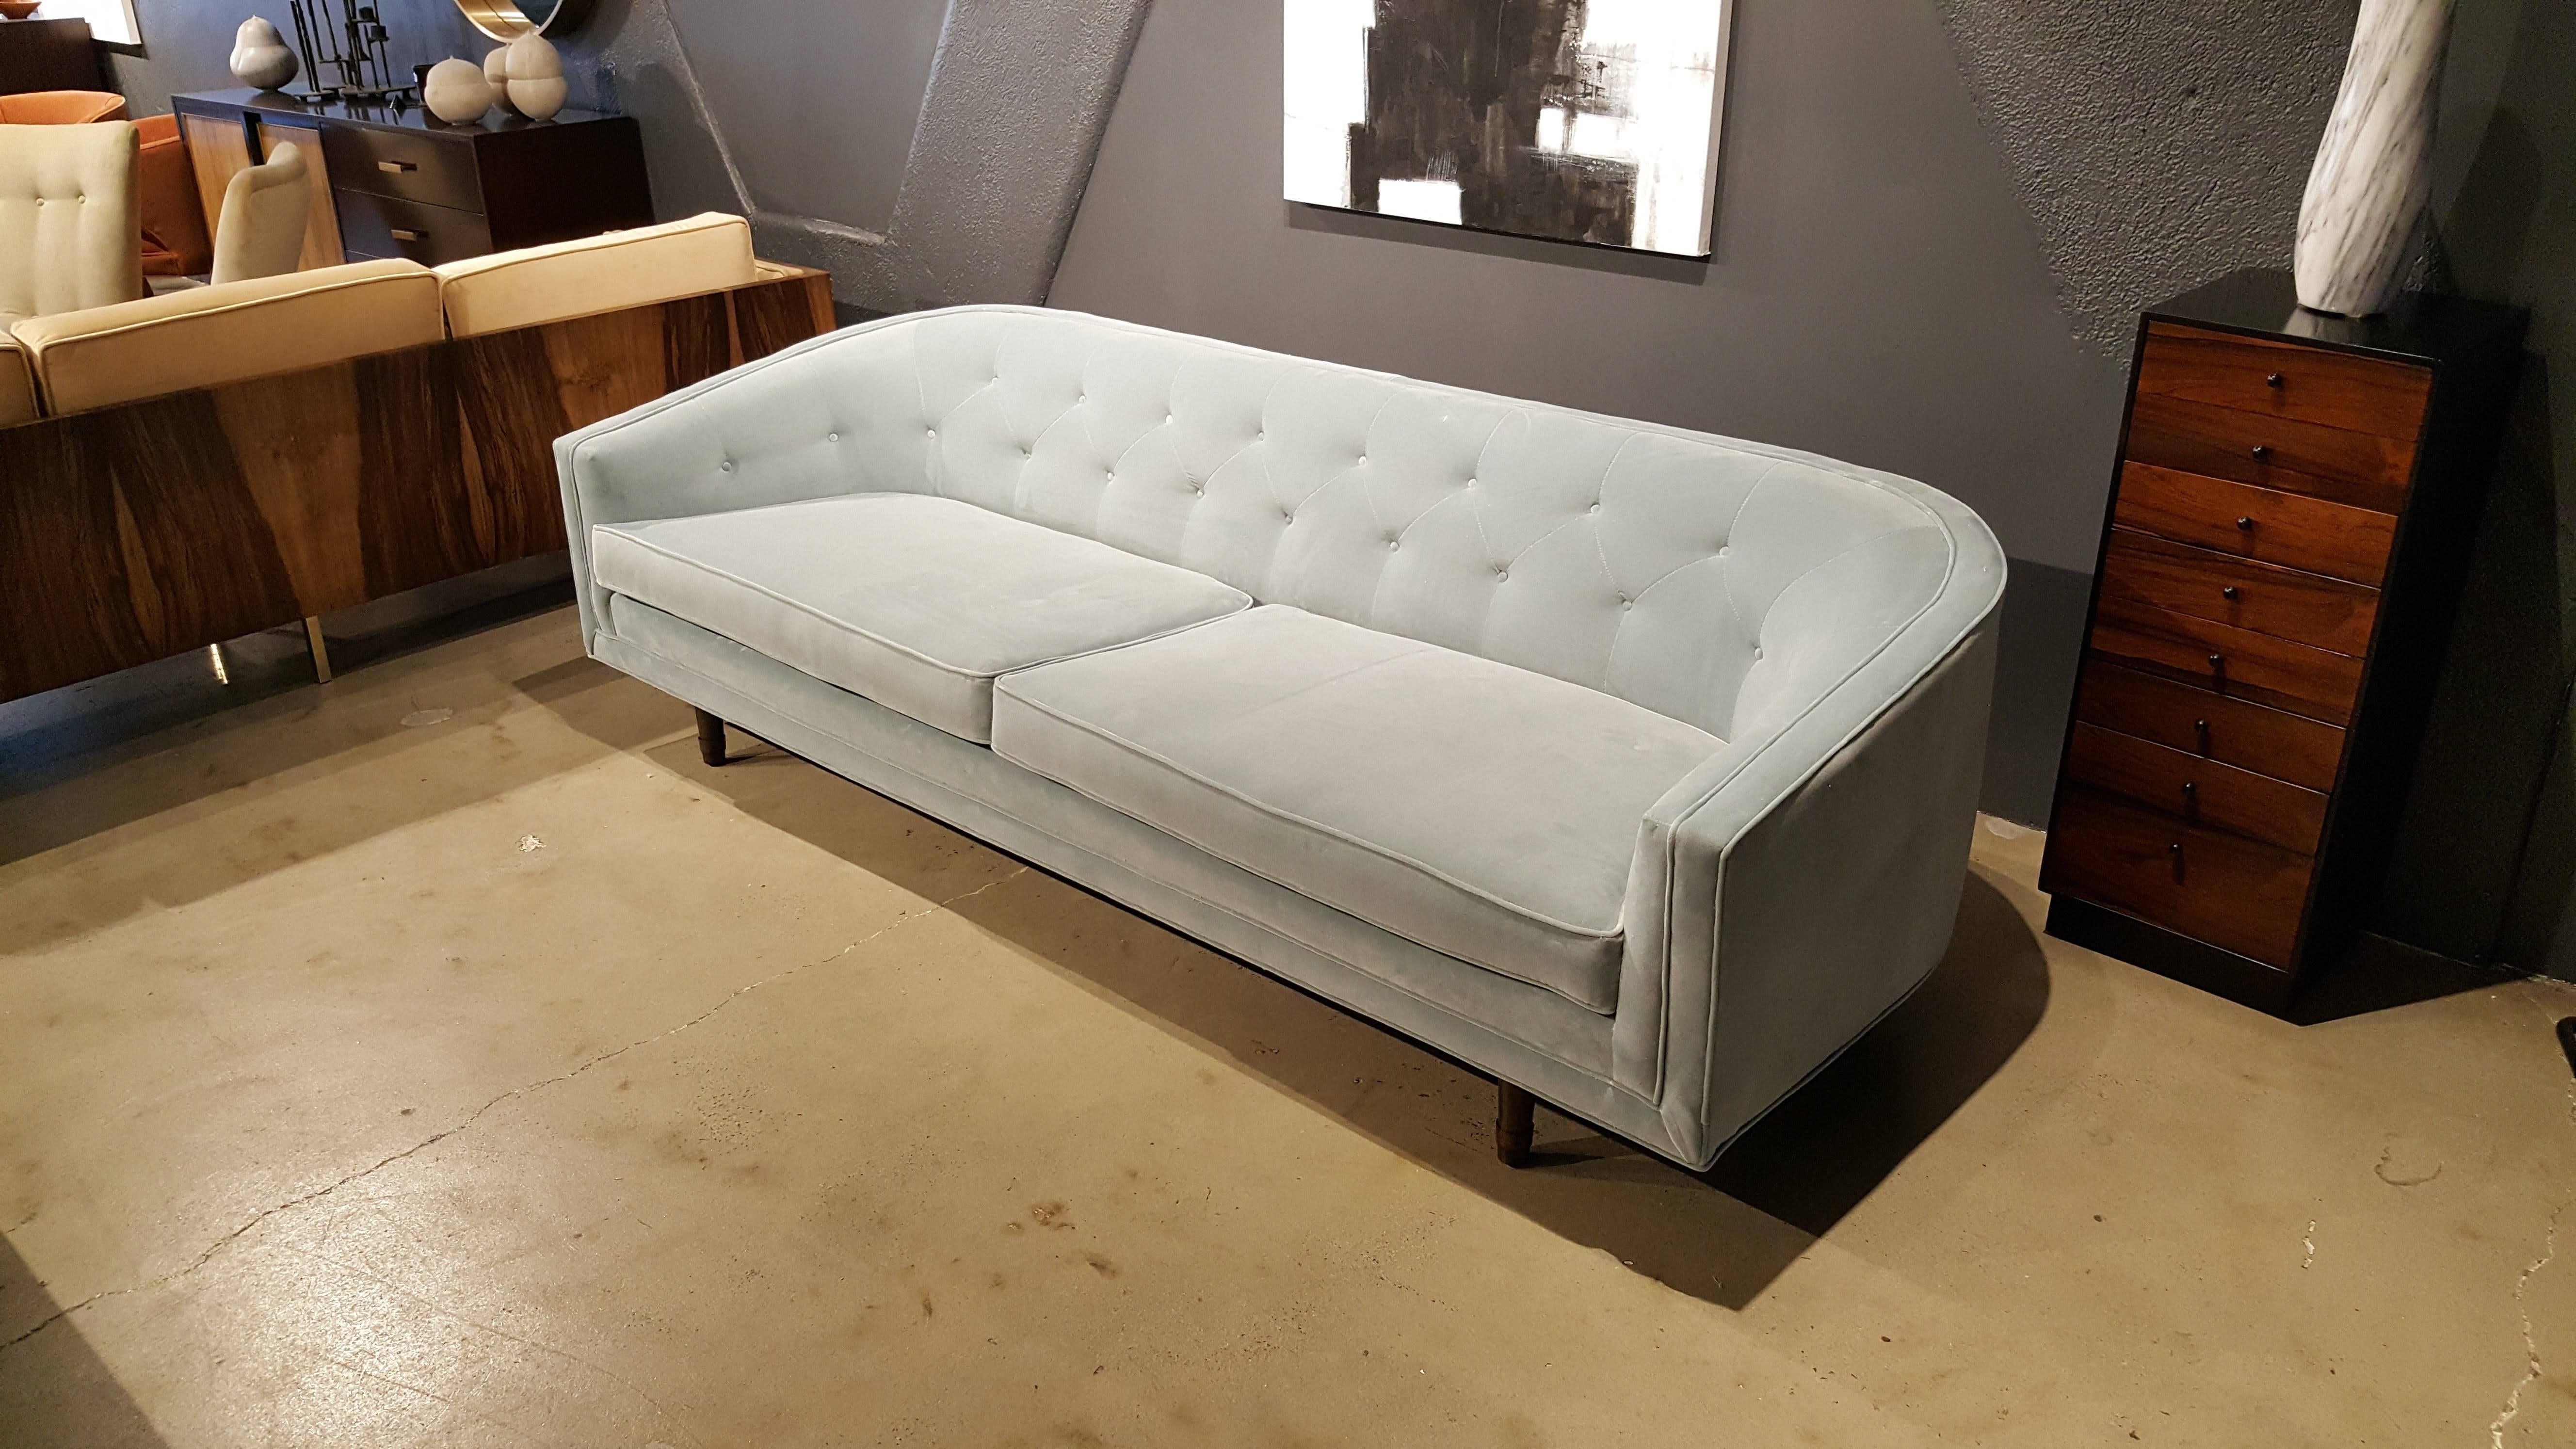 American Mid-Century Sofa by Selig in Pale Blue Grey Velvet, 60s, William Hinn Attributed